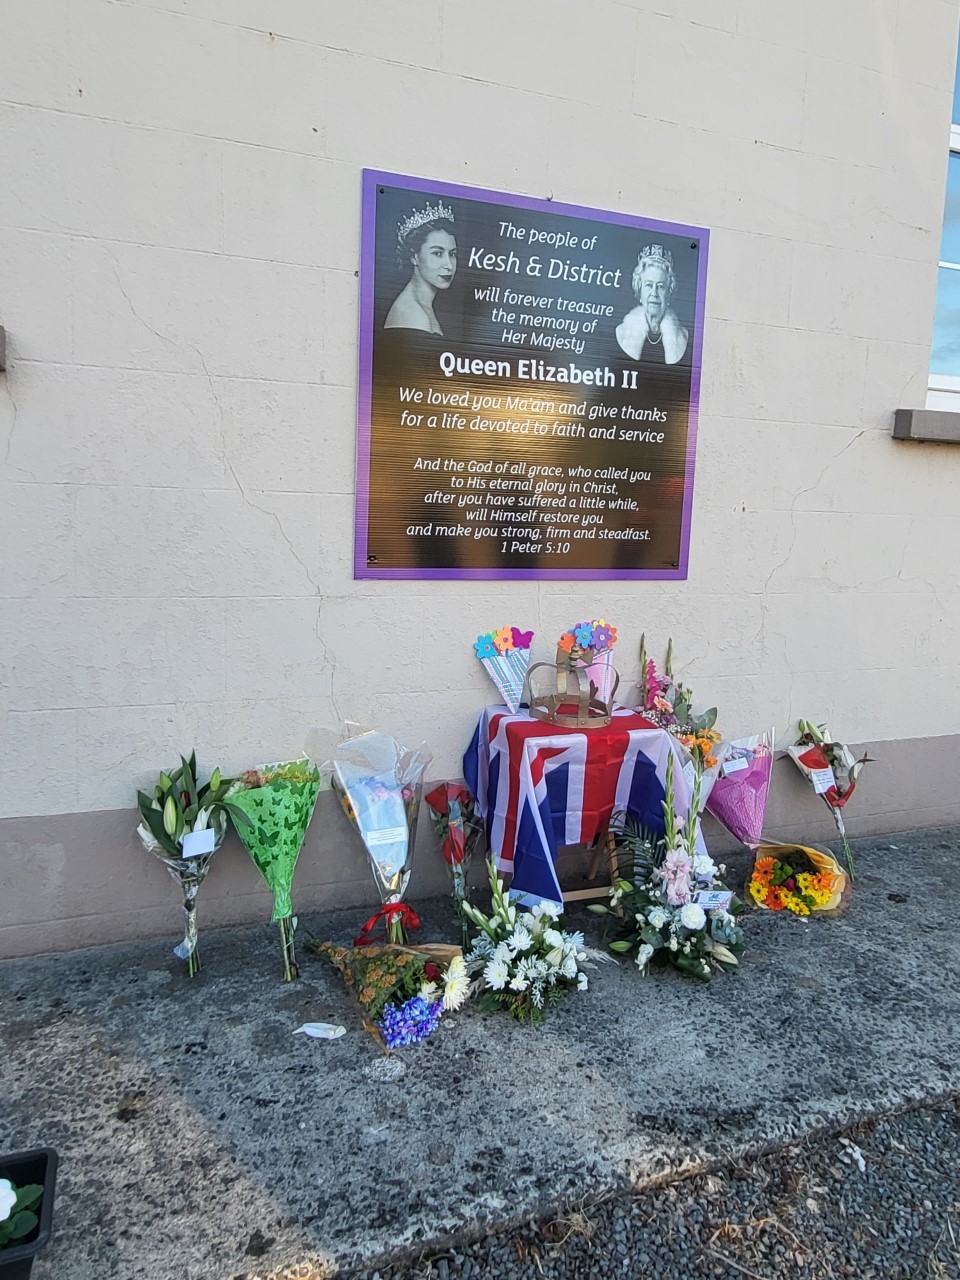 Pettigo District LOL No 10 held an act of reflection and opened a book of condolence for the late Queen Elizabeth II in Kesh Orange Hall on Monday, September 12. A memorial mural was also unveiled on the day (pictured).